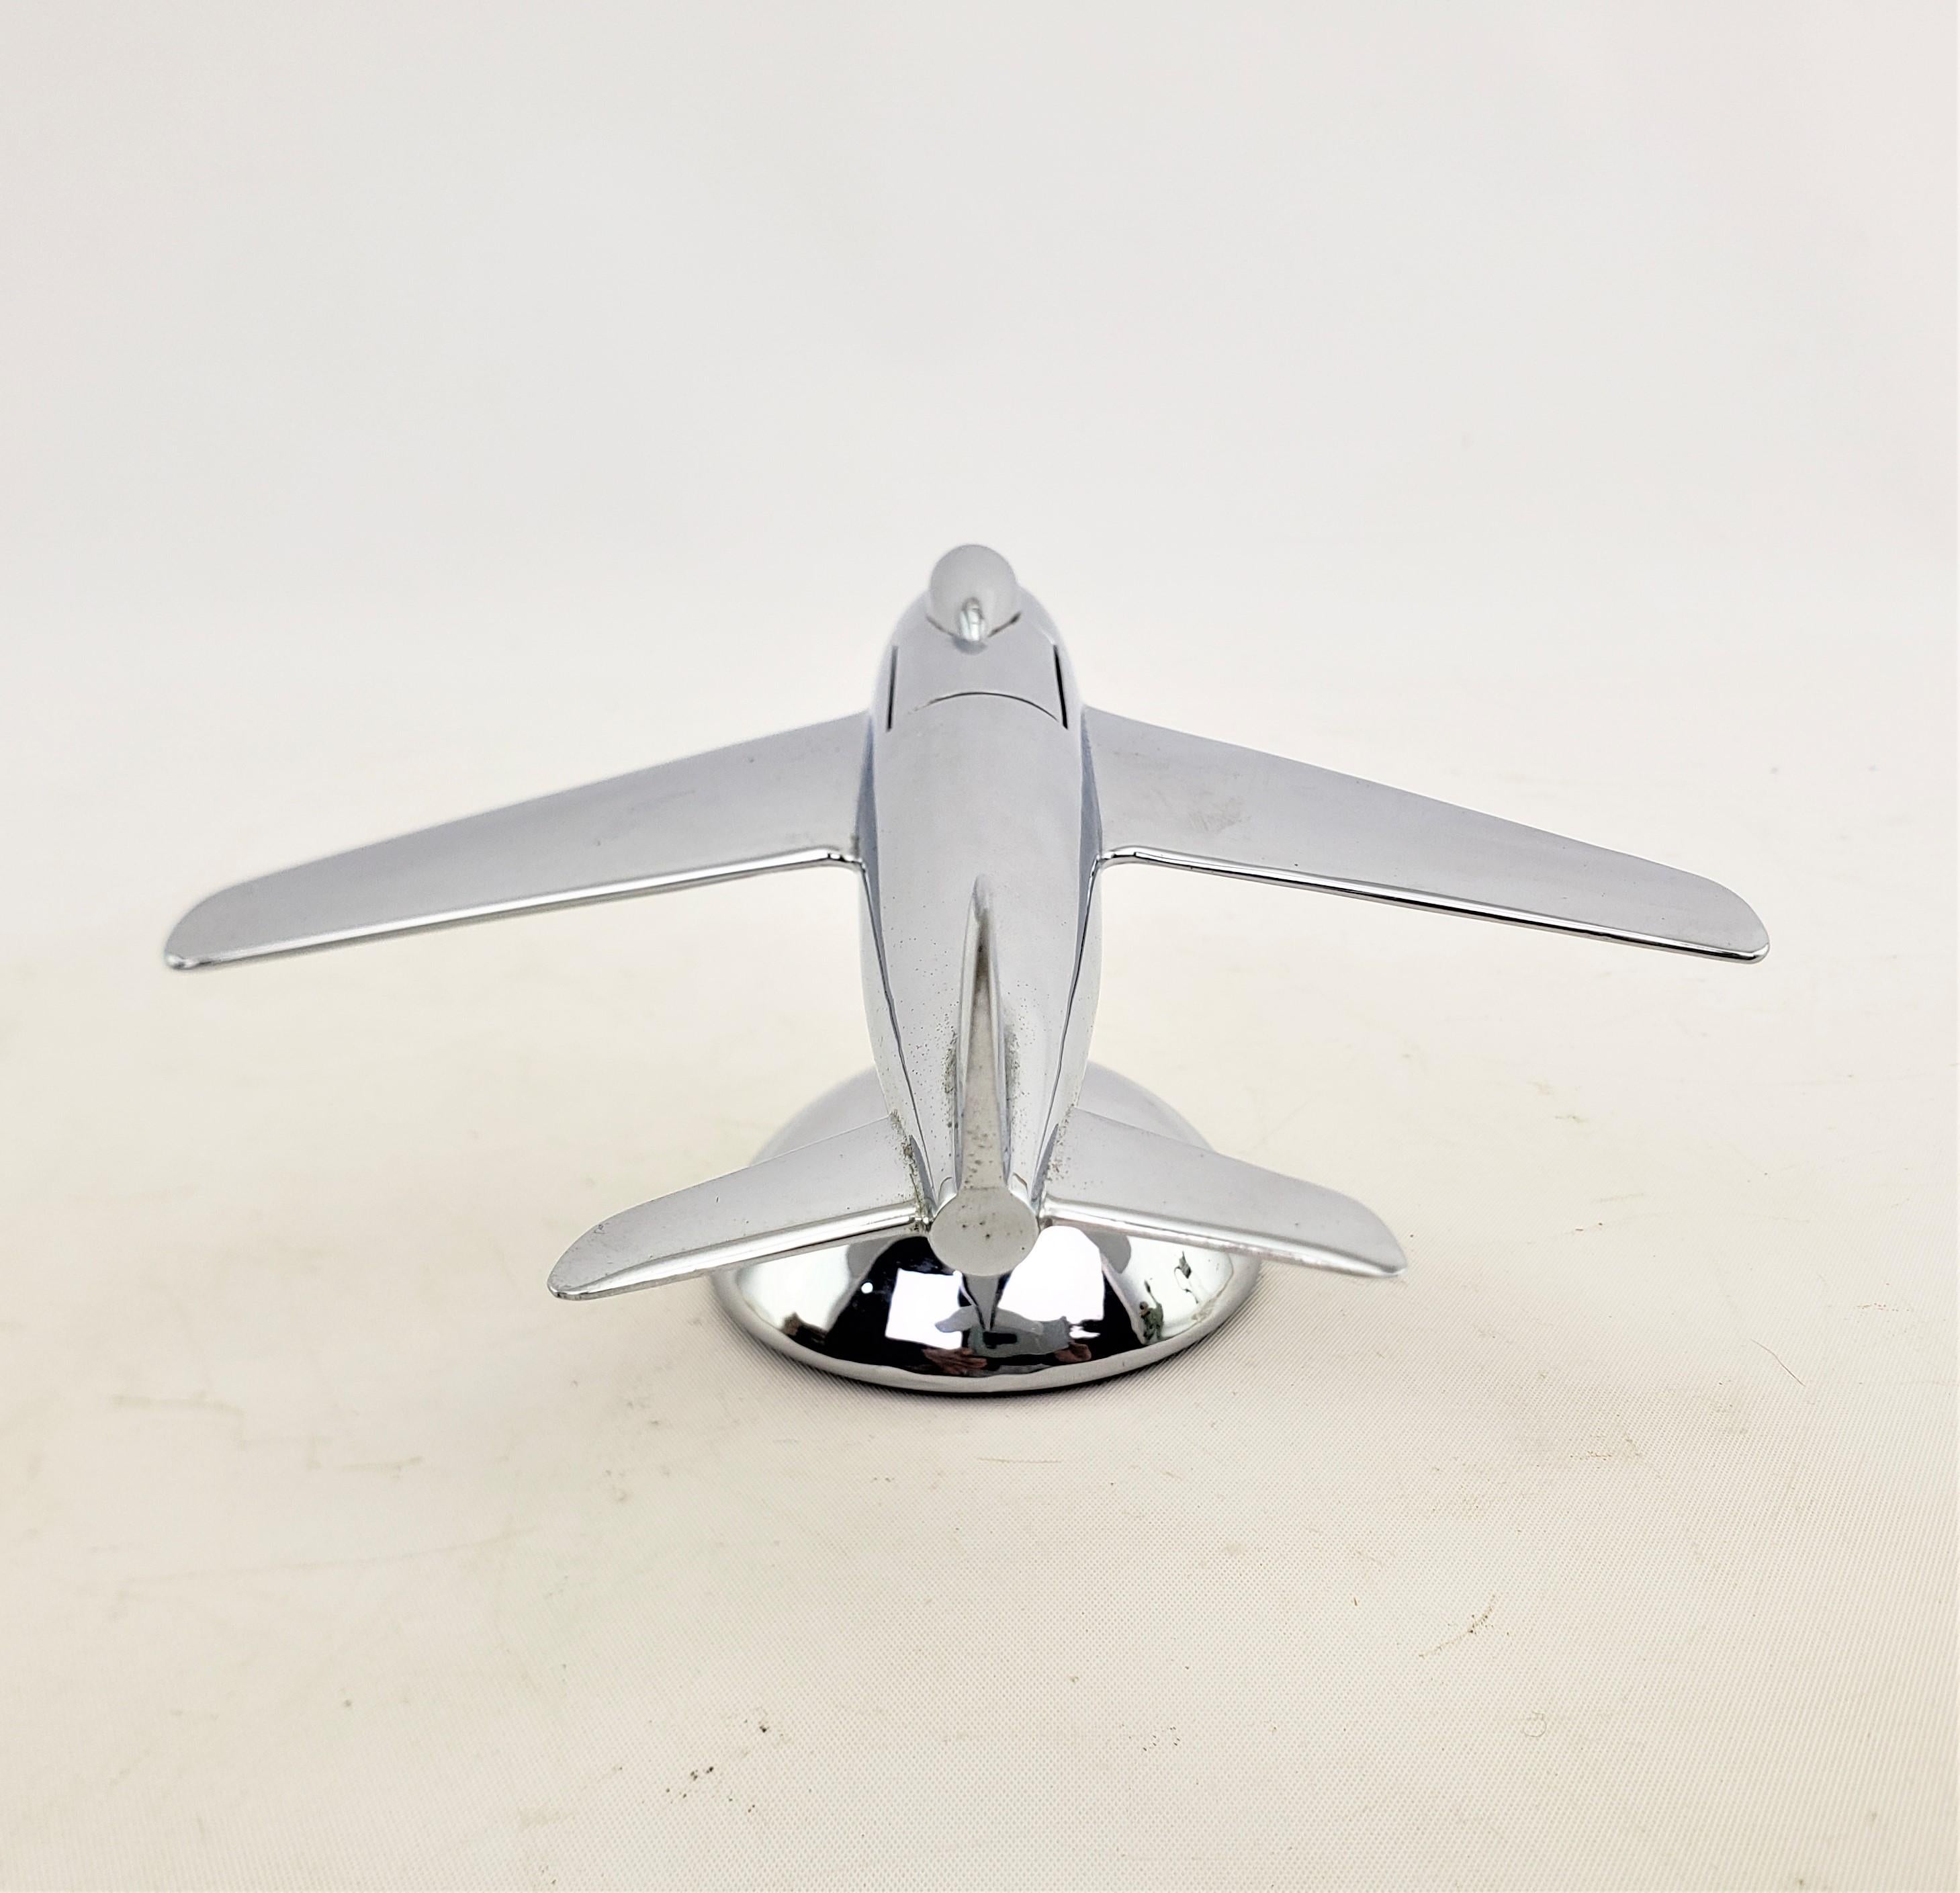 Metal Dunhill Mid-Century Modern Chrome Stylized Sabre Jet Airplane Table Lighter For Sale